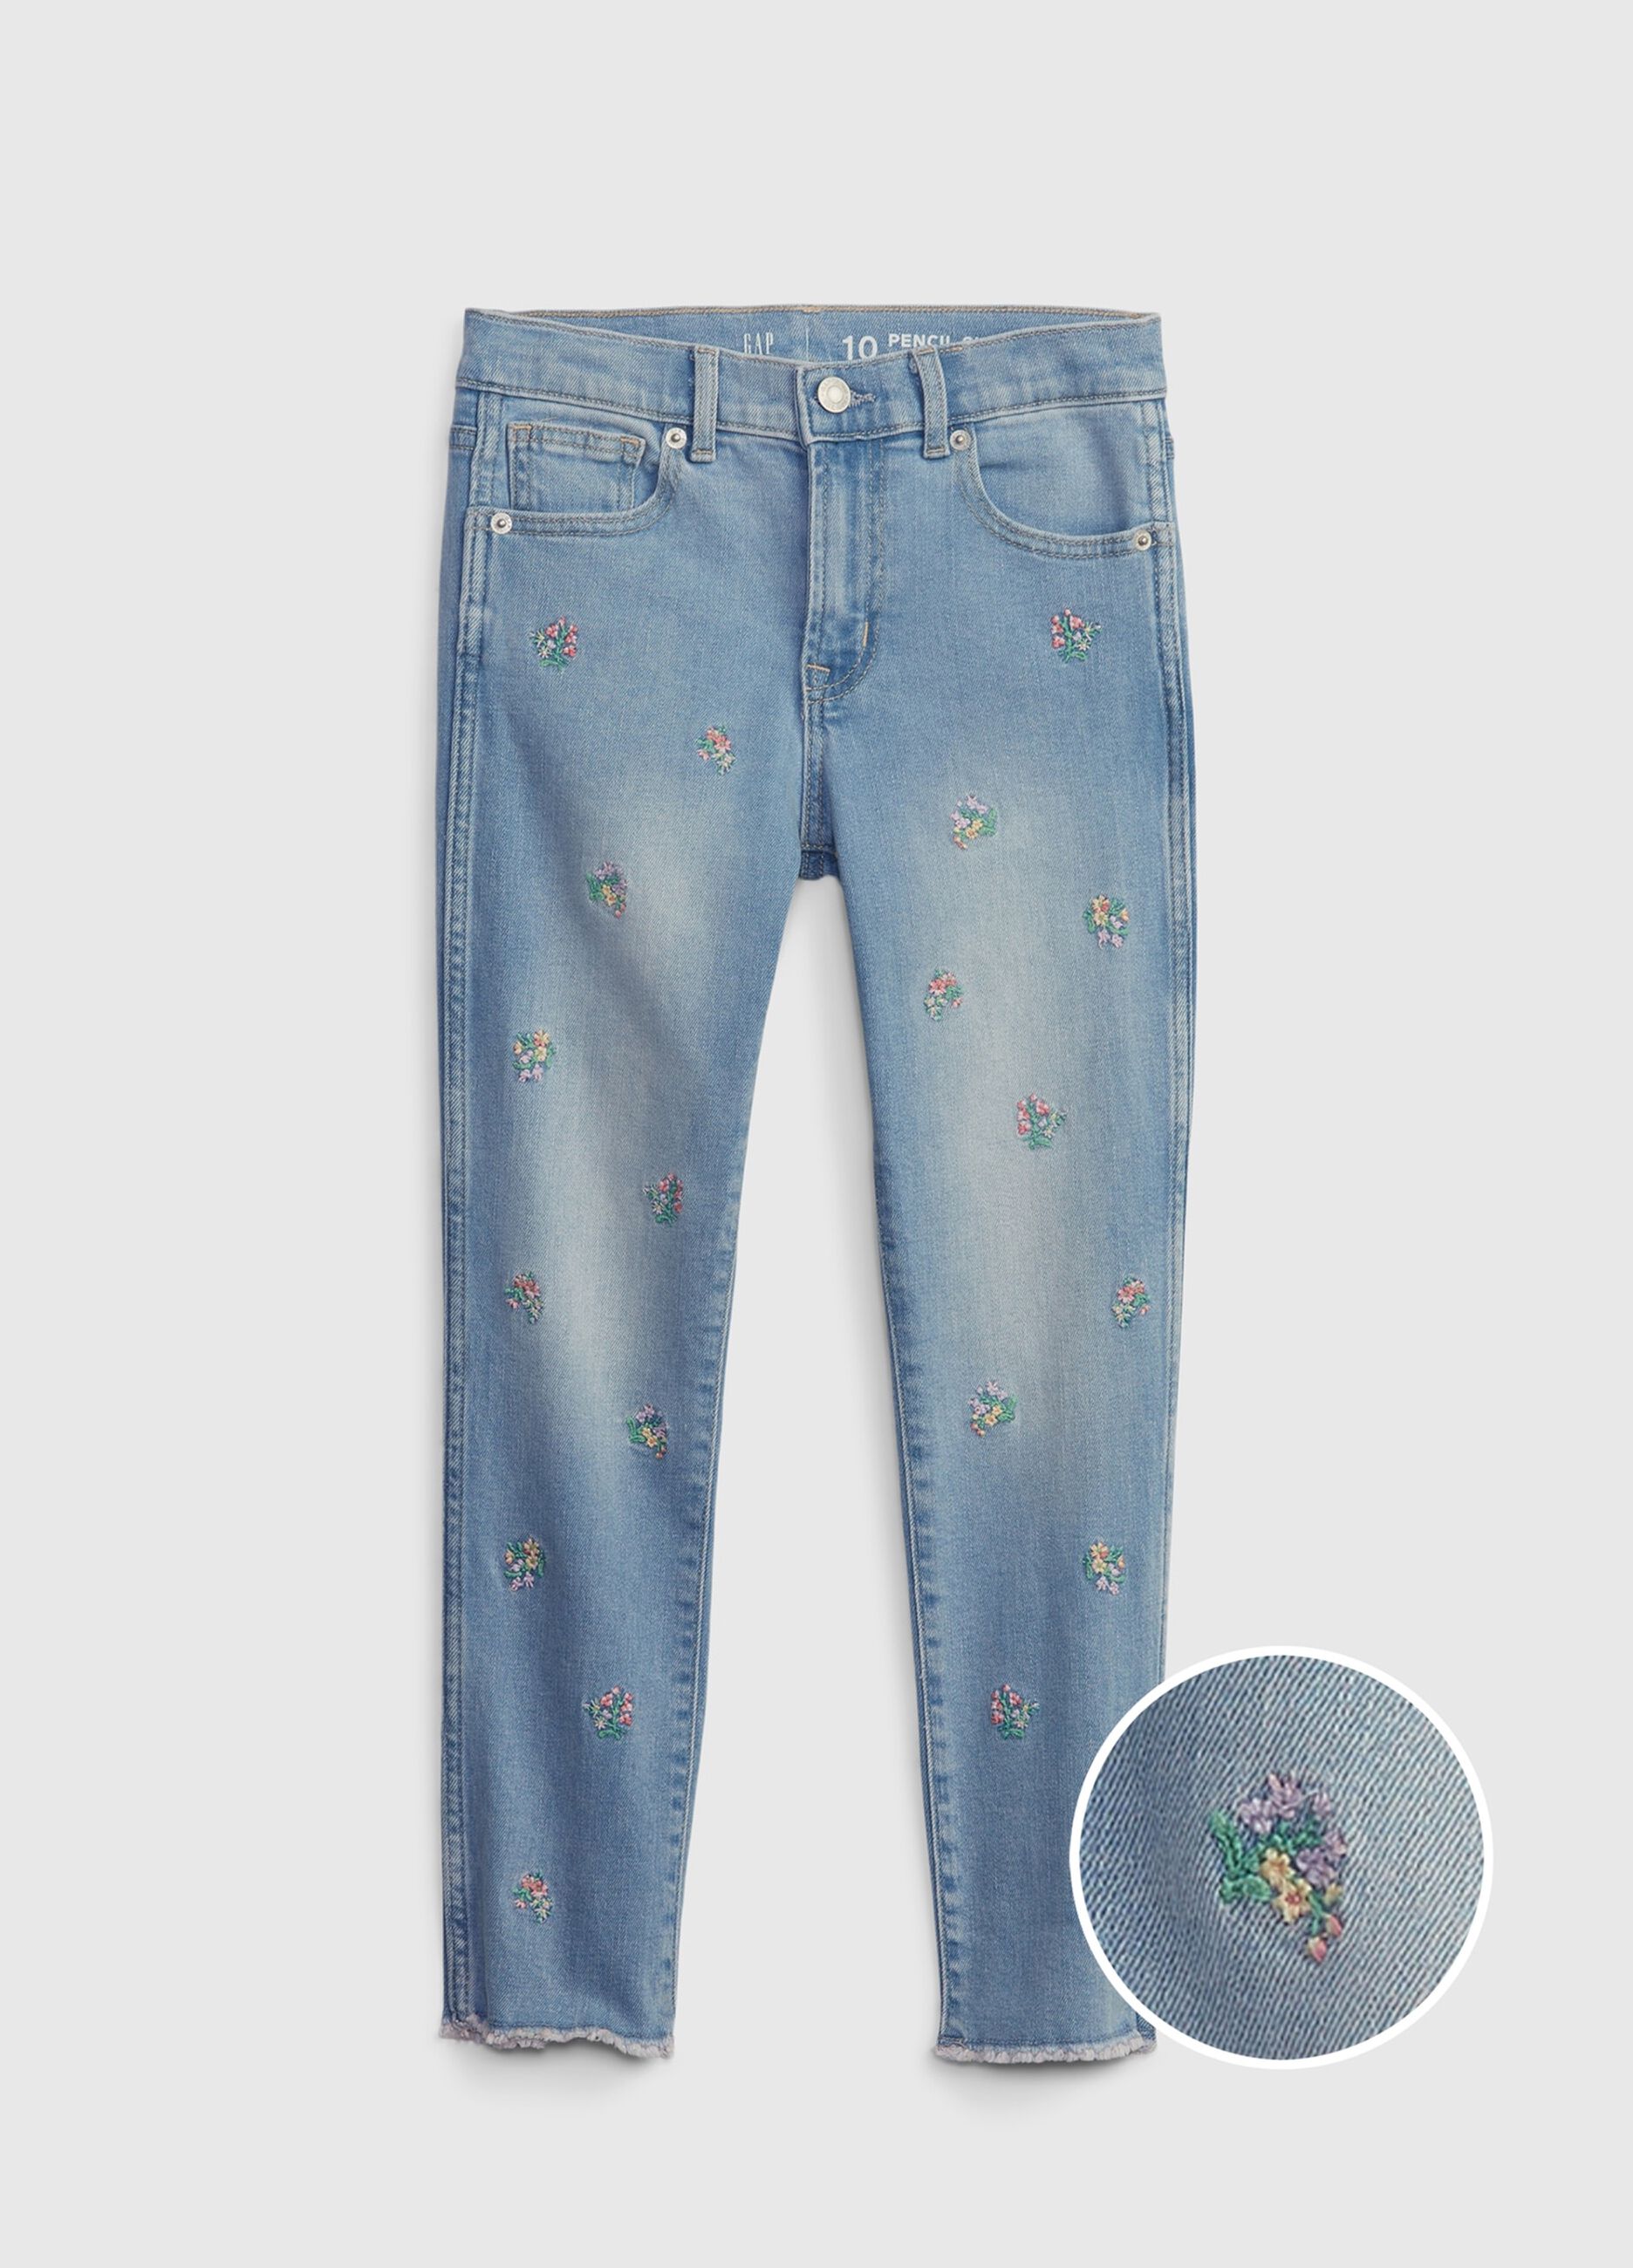 Slim-fit jeans with embroidered flowers